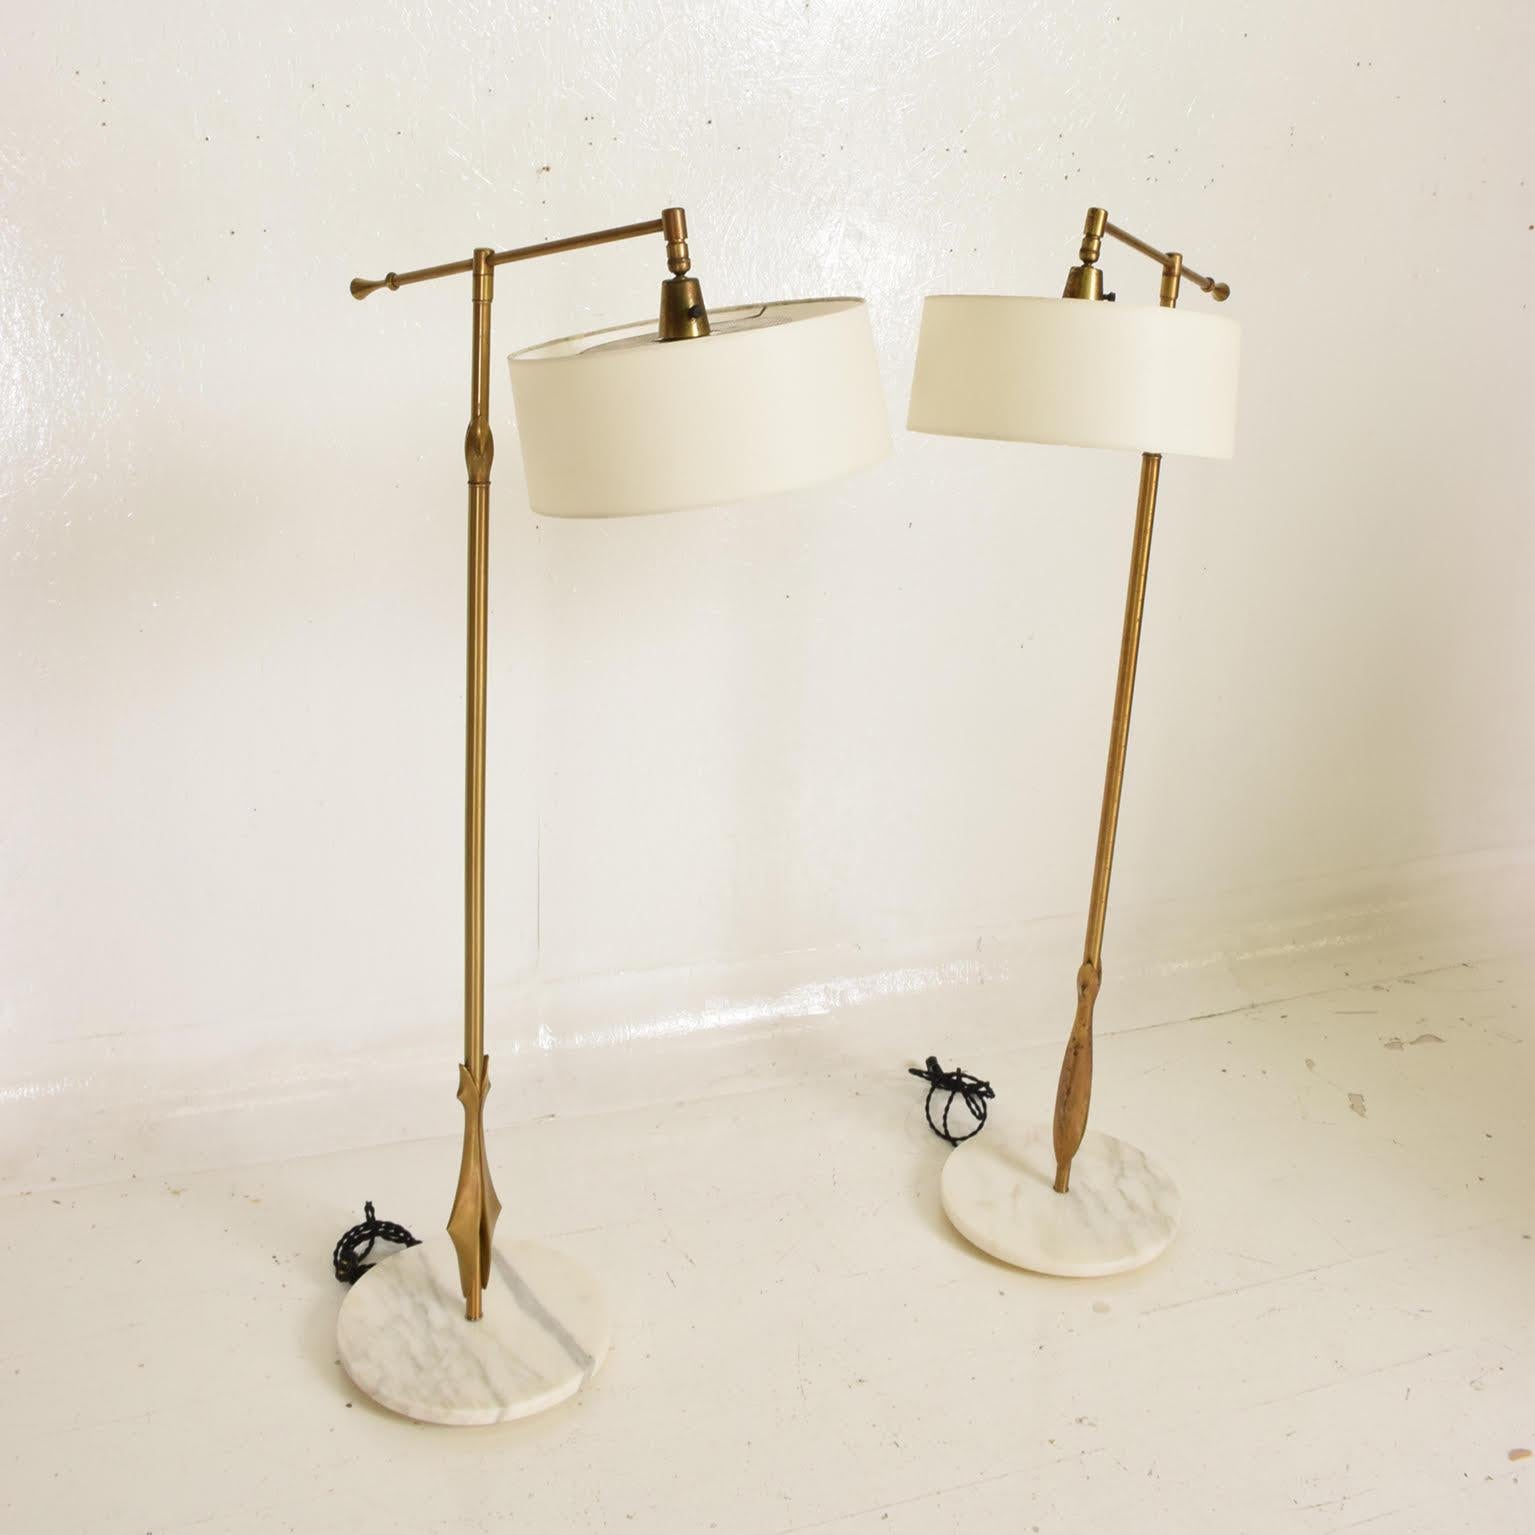 Steel Rare Pair of Floor Lamps by Gerald Thurston with Original Shade and Marble Base